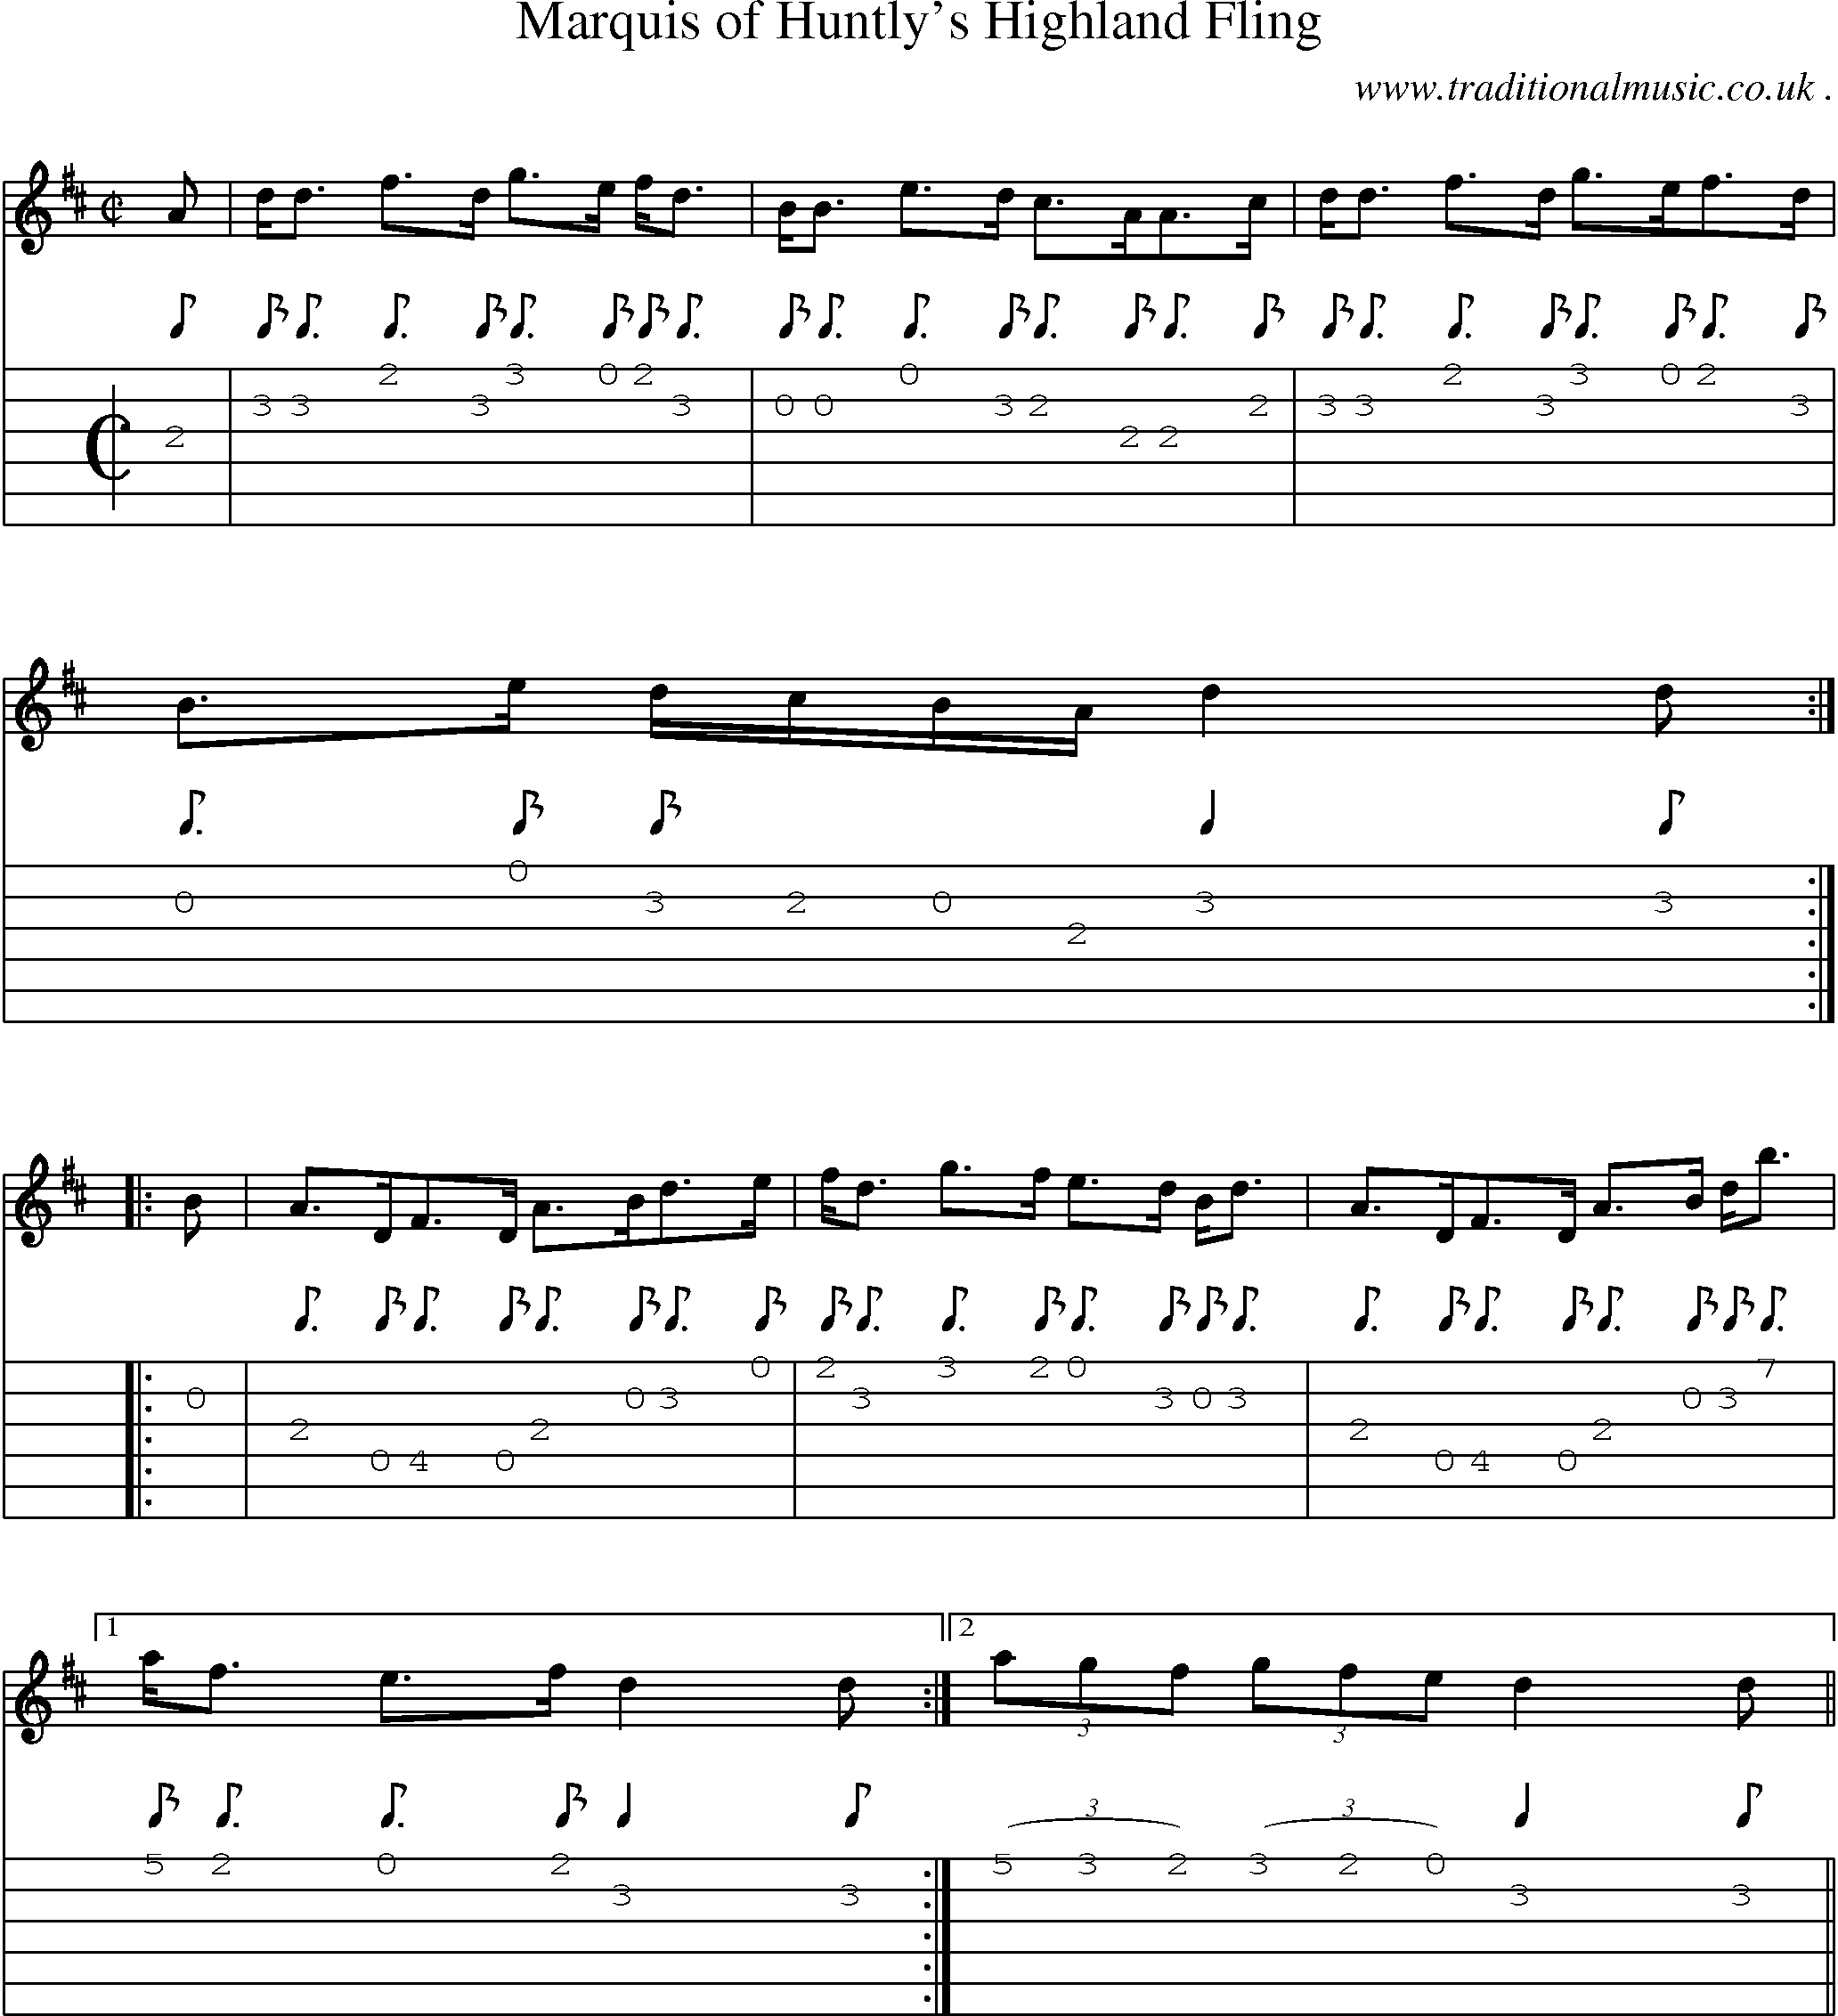 Sheet-music  score, Chords and Guitar Tabs for Marquis Of Huntlys Highland Fling